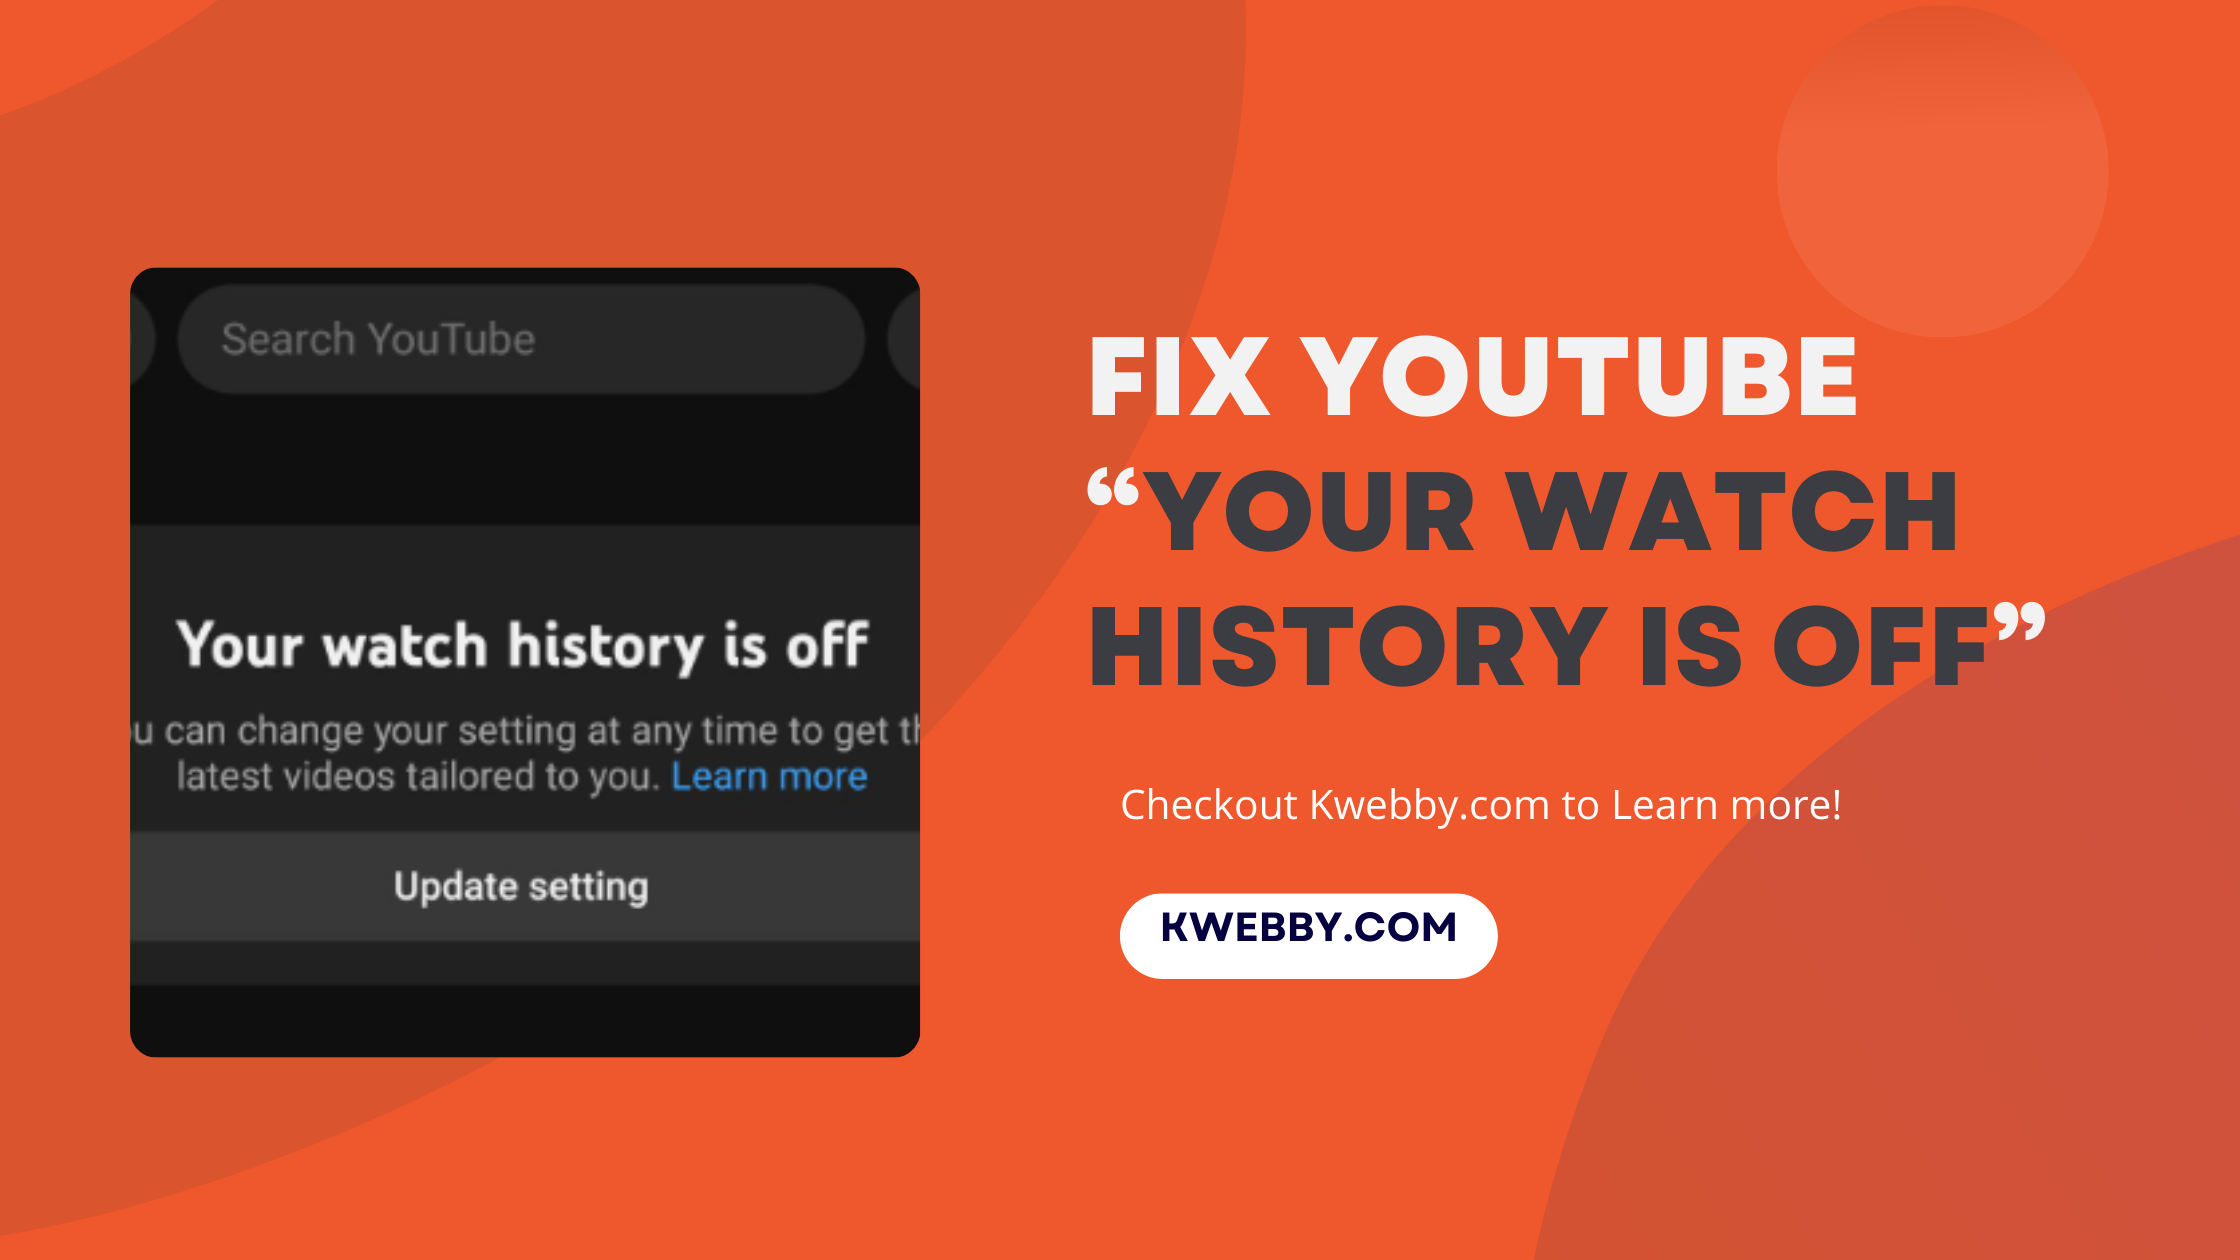 How to Fix YouTube “Your watch history is off” in 3 Steps